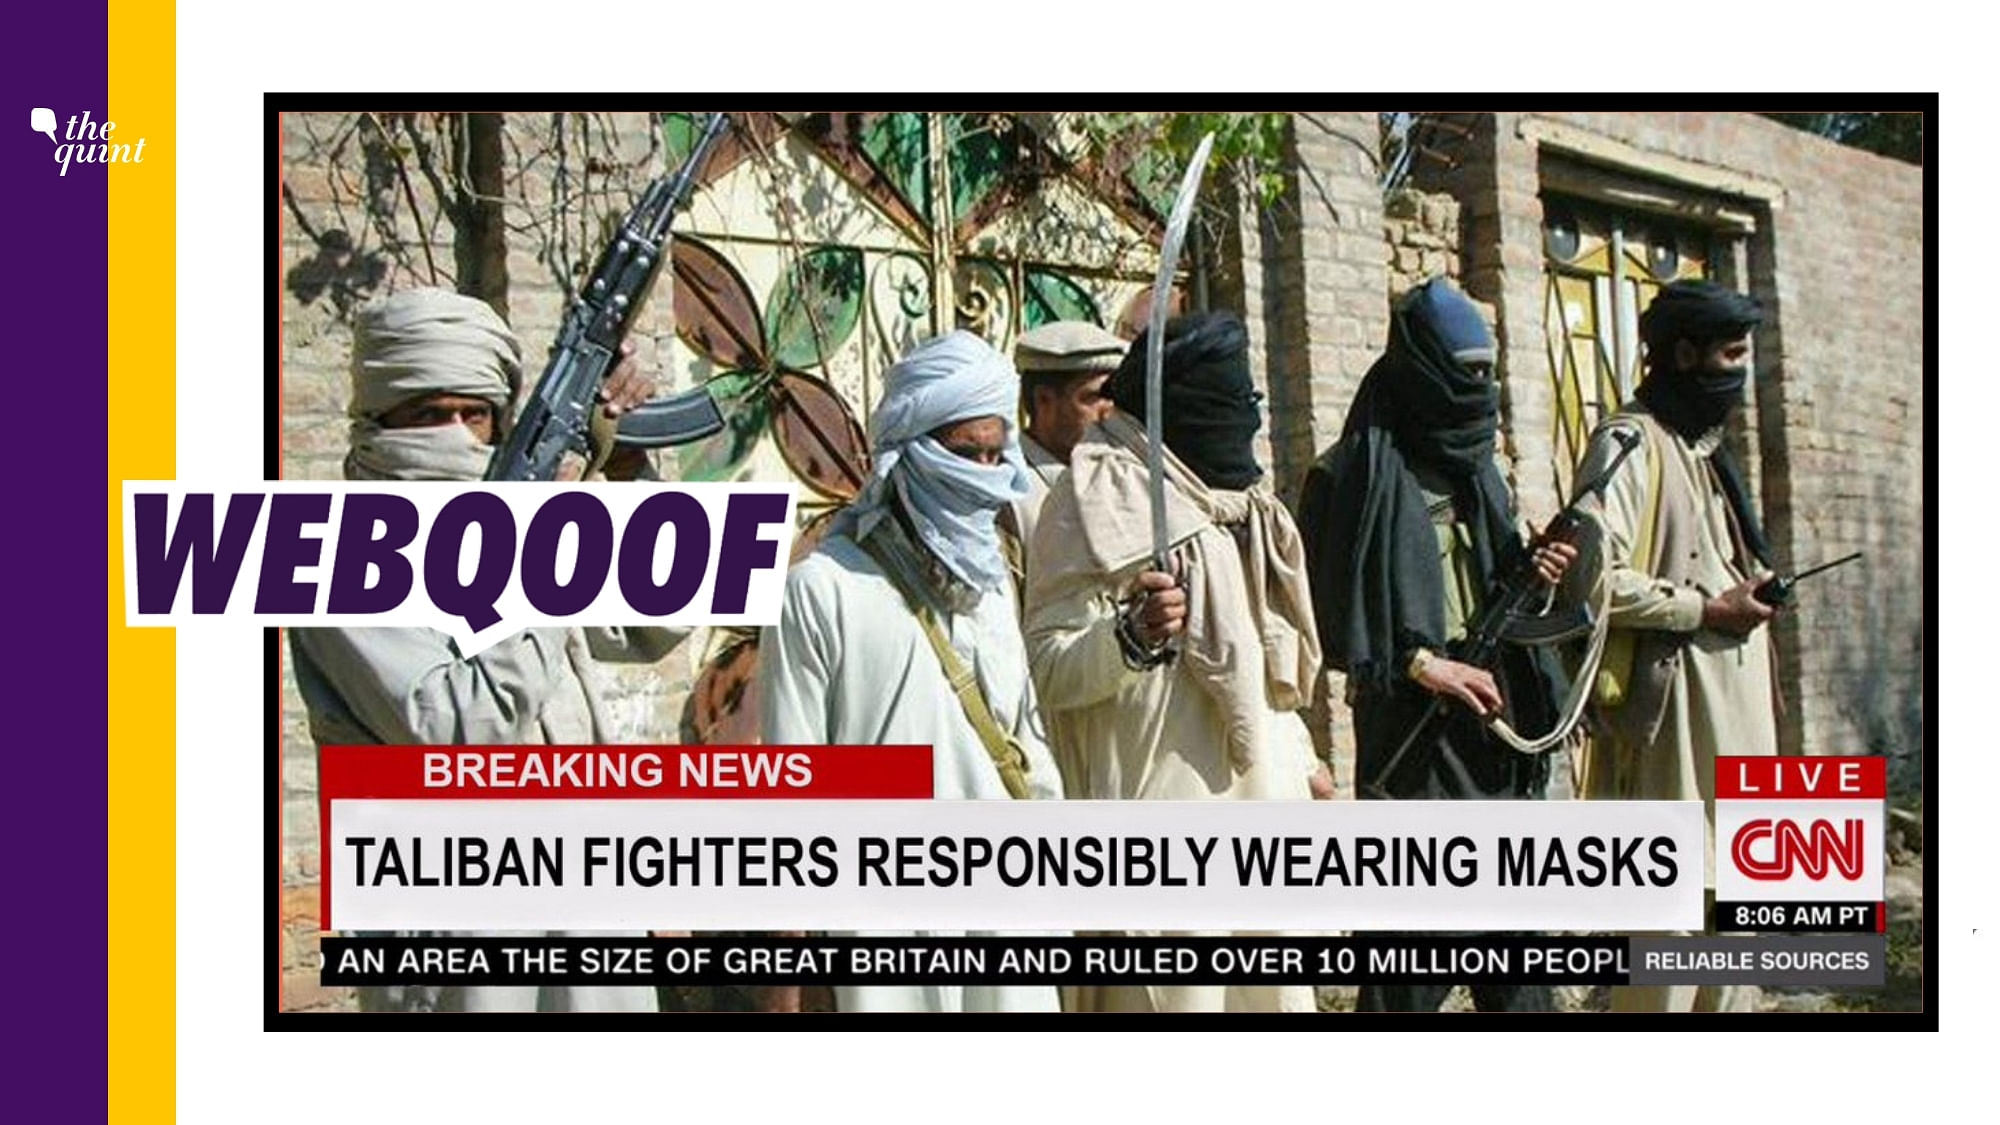 <div class="paragraphs"><p>The claim says CNN praises Taliban for wearing masks during attacks in Afghanistan.</p></div>